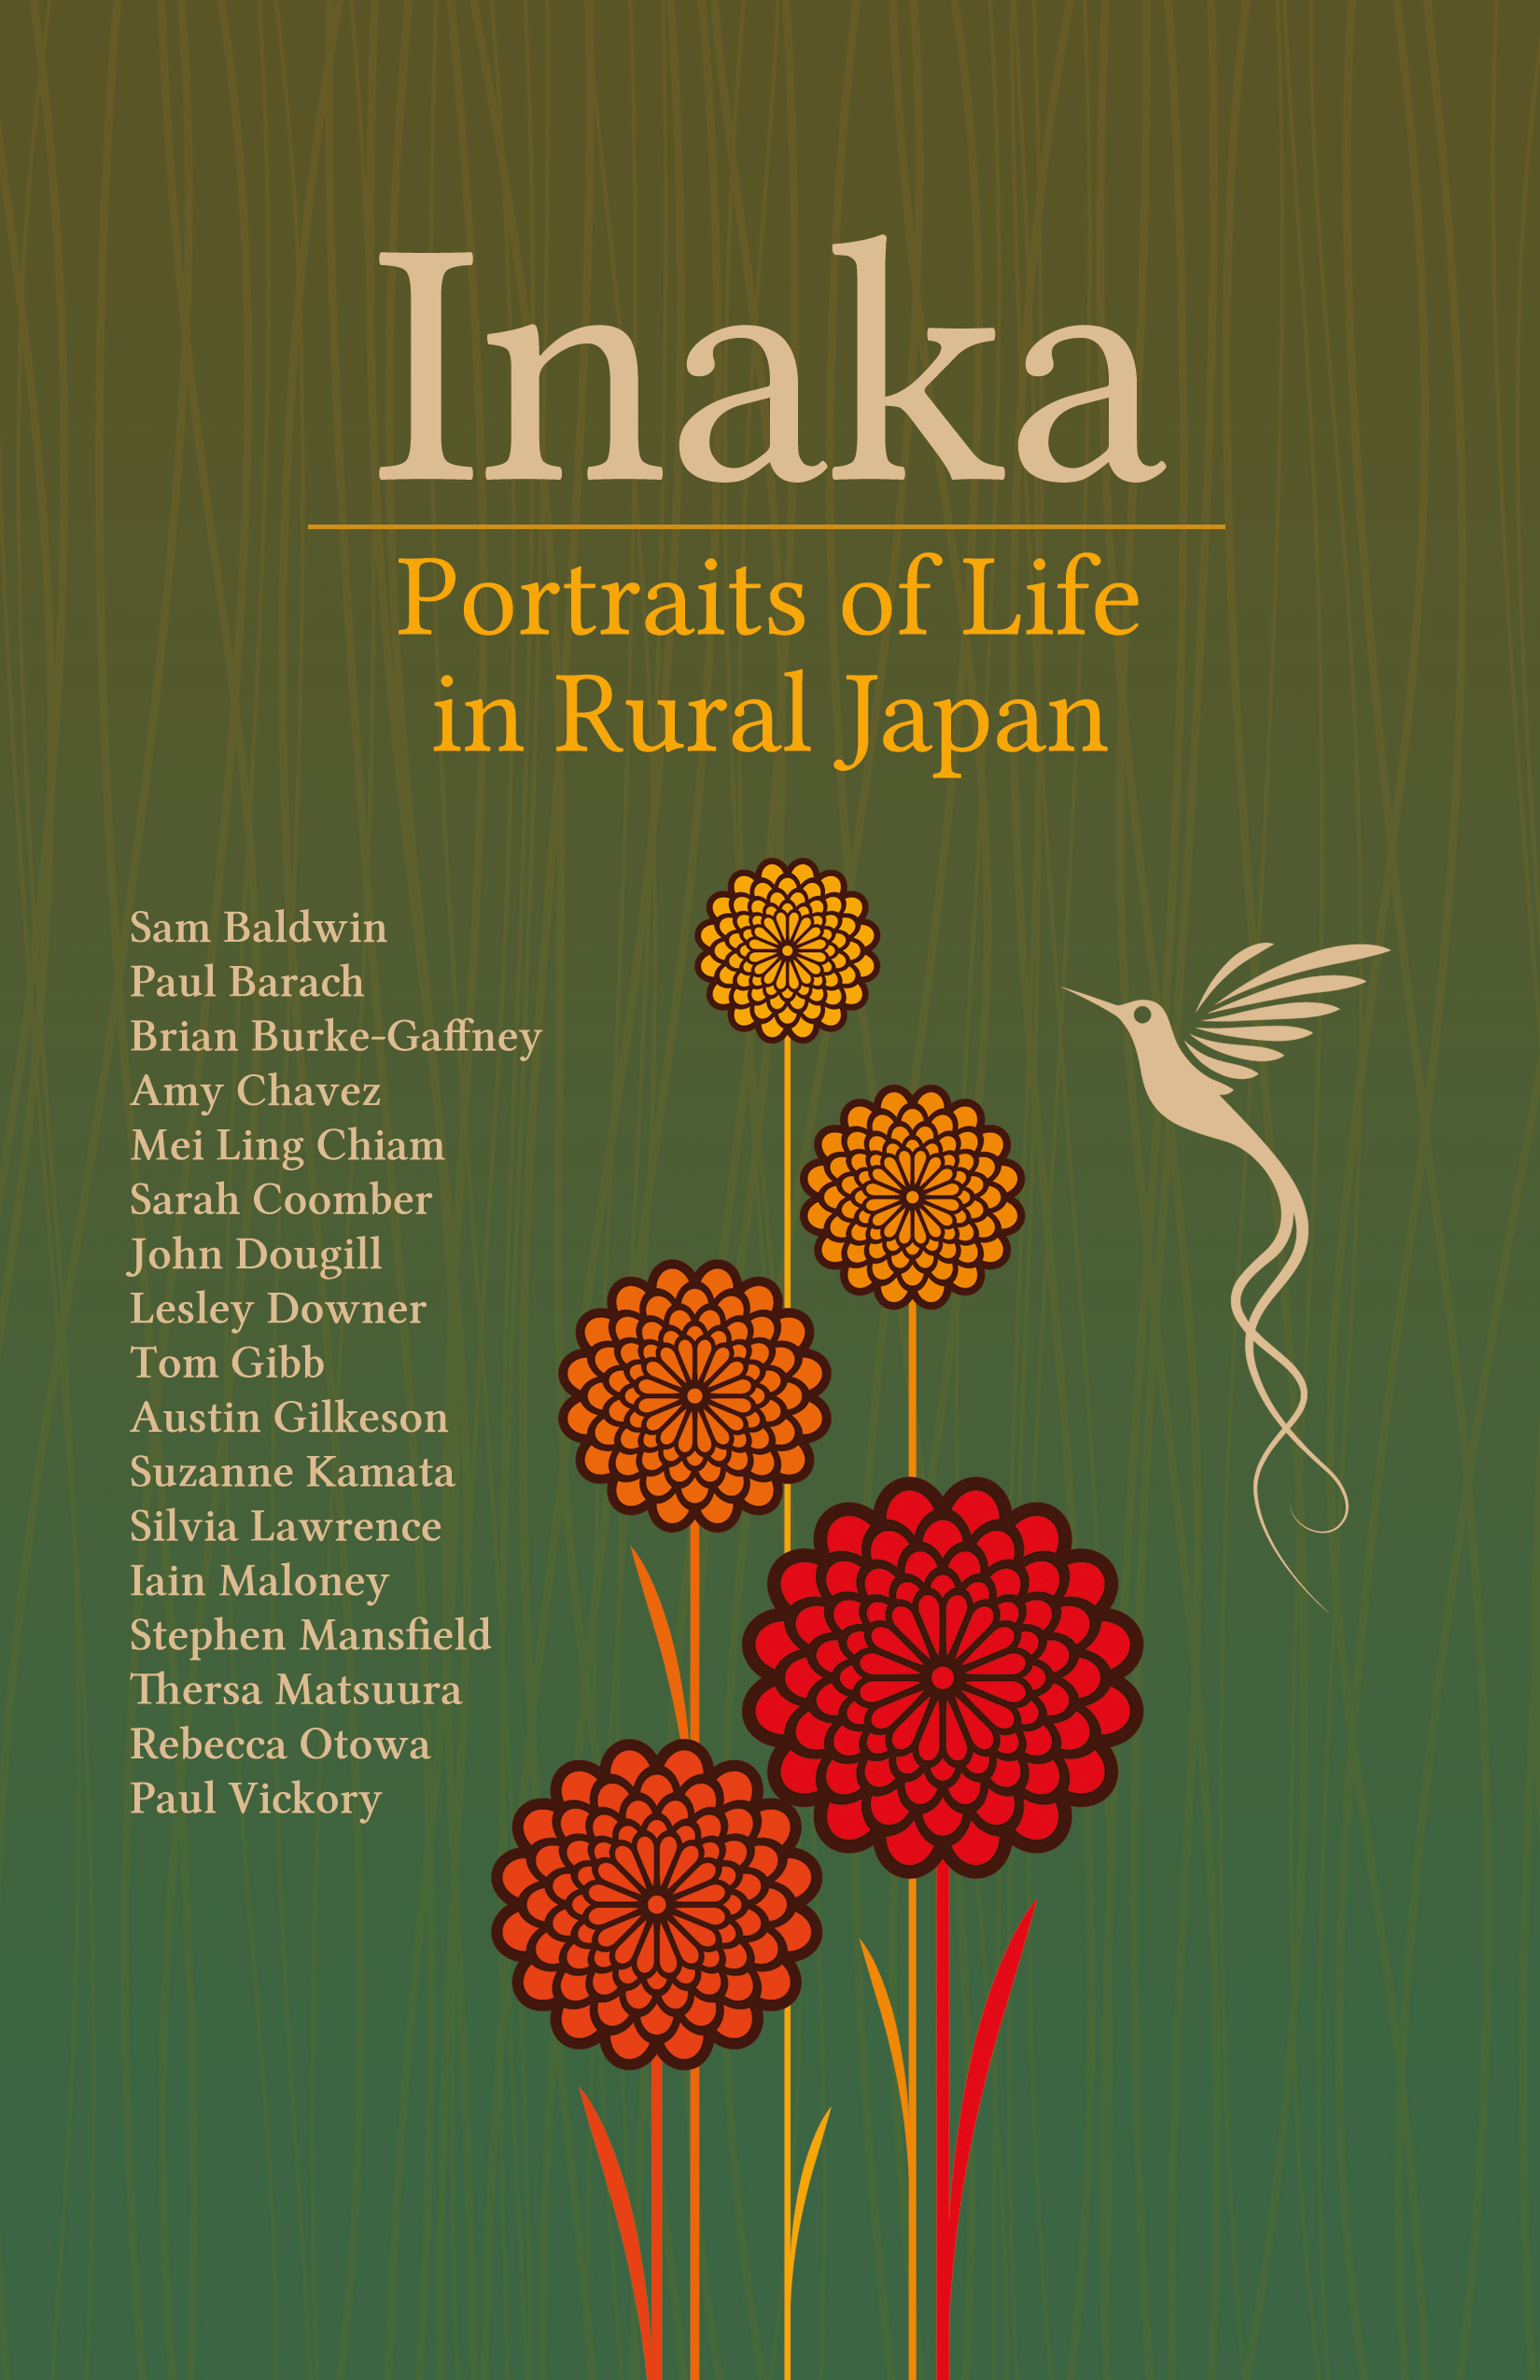 The cover of Inaka: Portraits of Life in Rural Japan